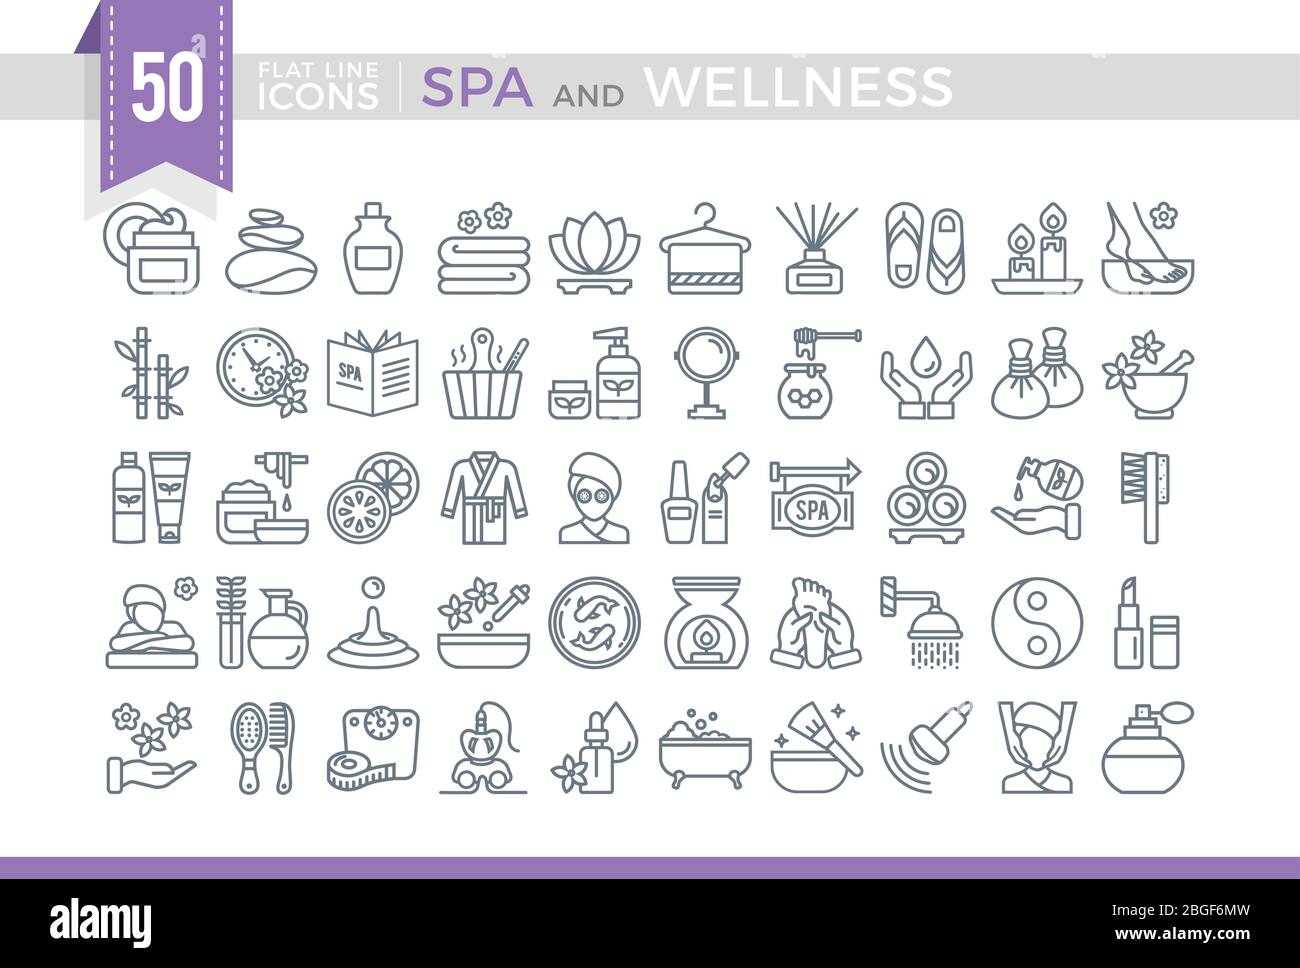 Set Vector Flat Line Icons SPA and Wellness. Stock Vector